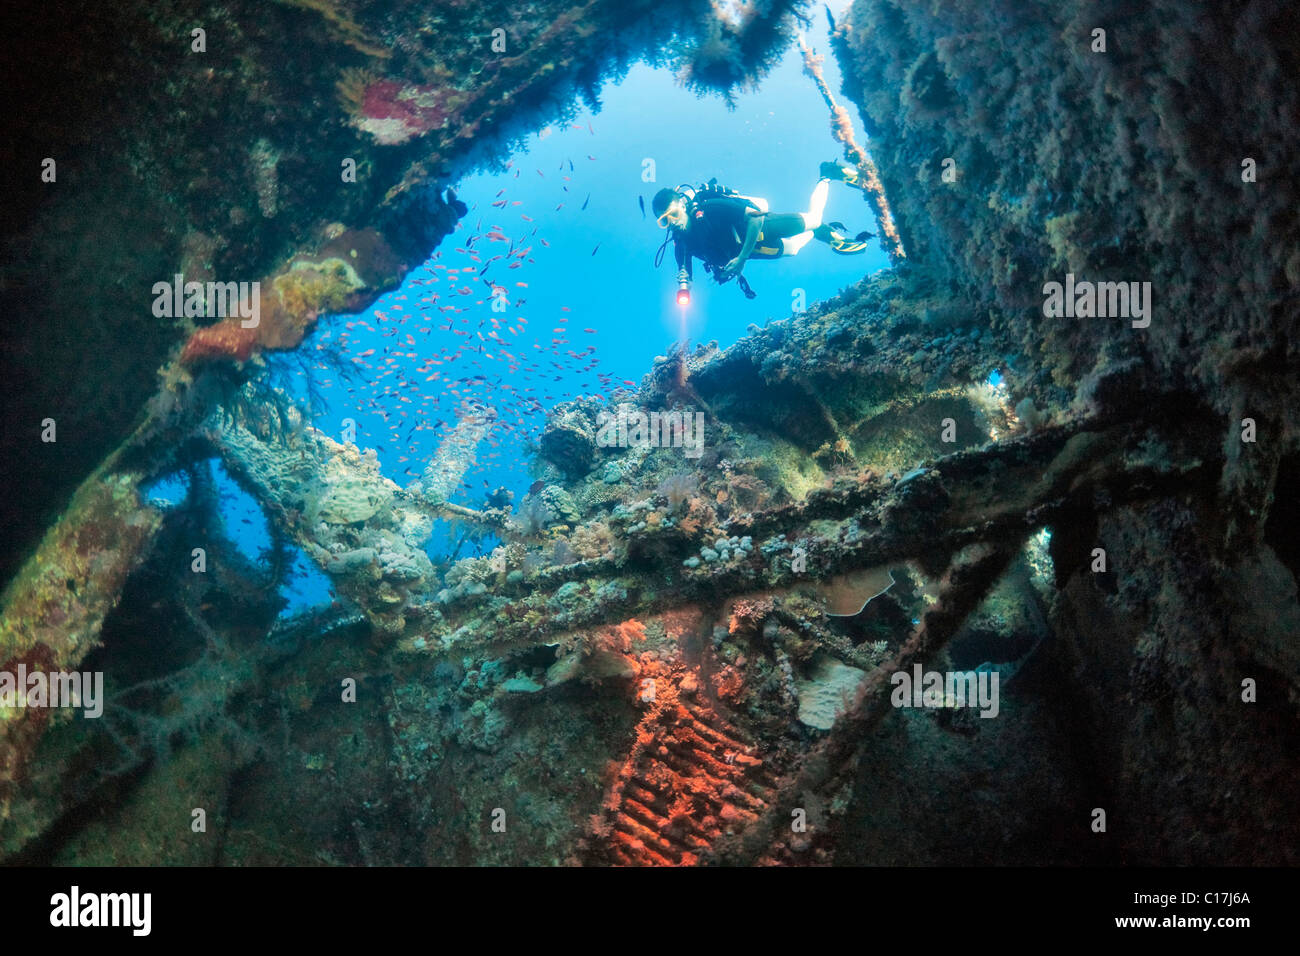 A scuba diver shines a torch as he enters the Numidia shipwreck at Big Brother Island in the Egyptian Red Sea. Stock Photo